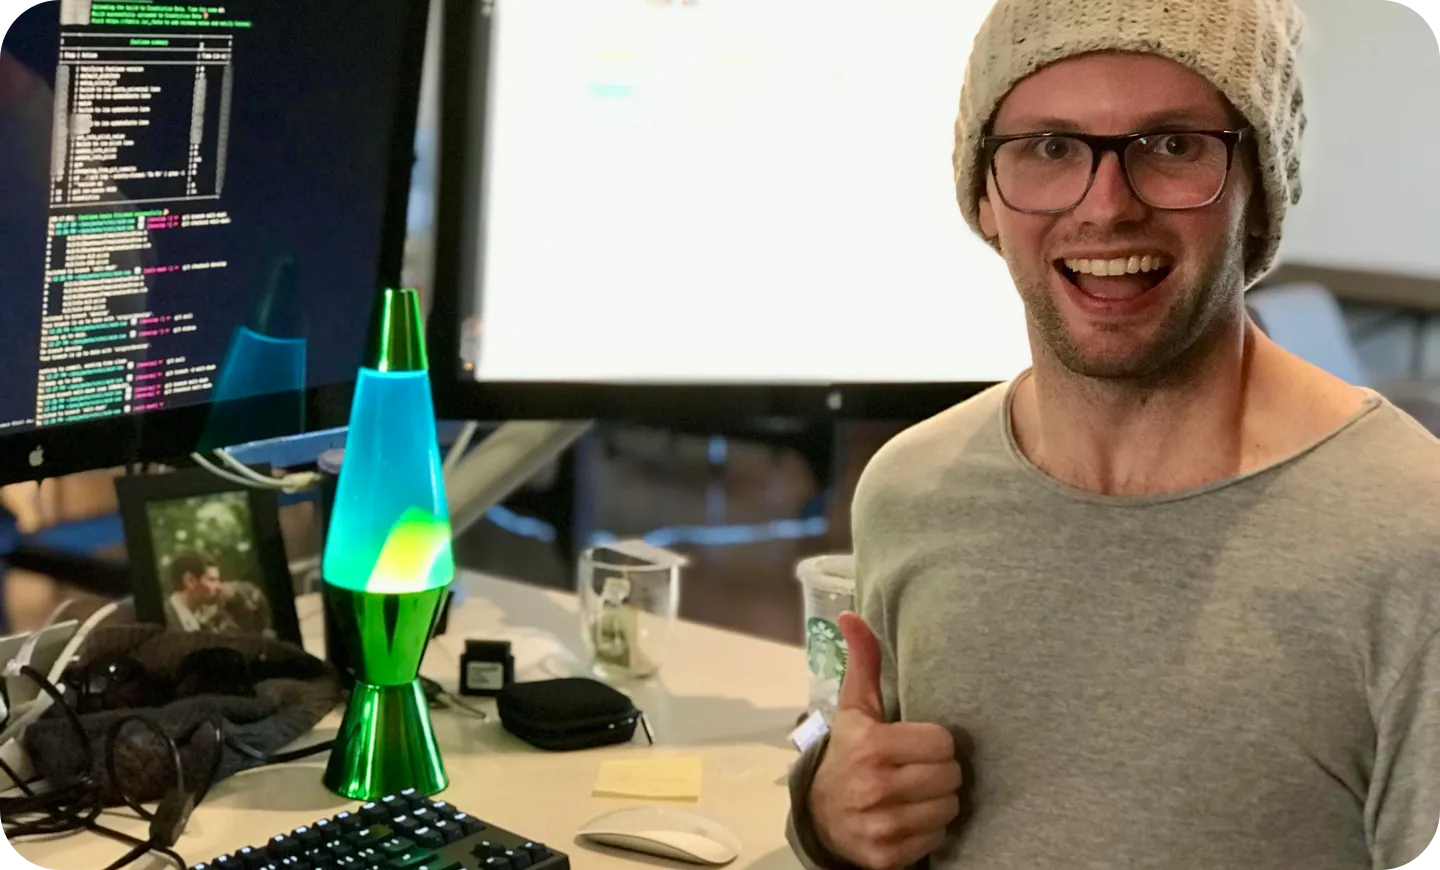 Team member with thumbs up next to a lava lamp